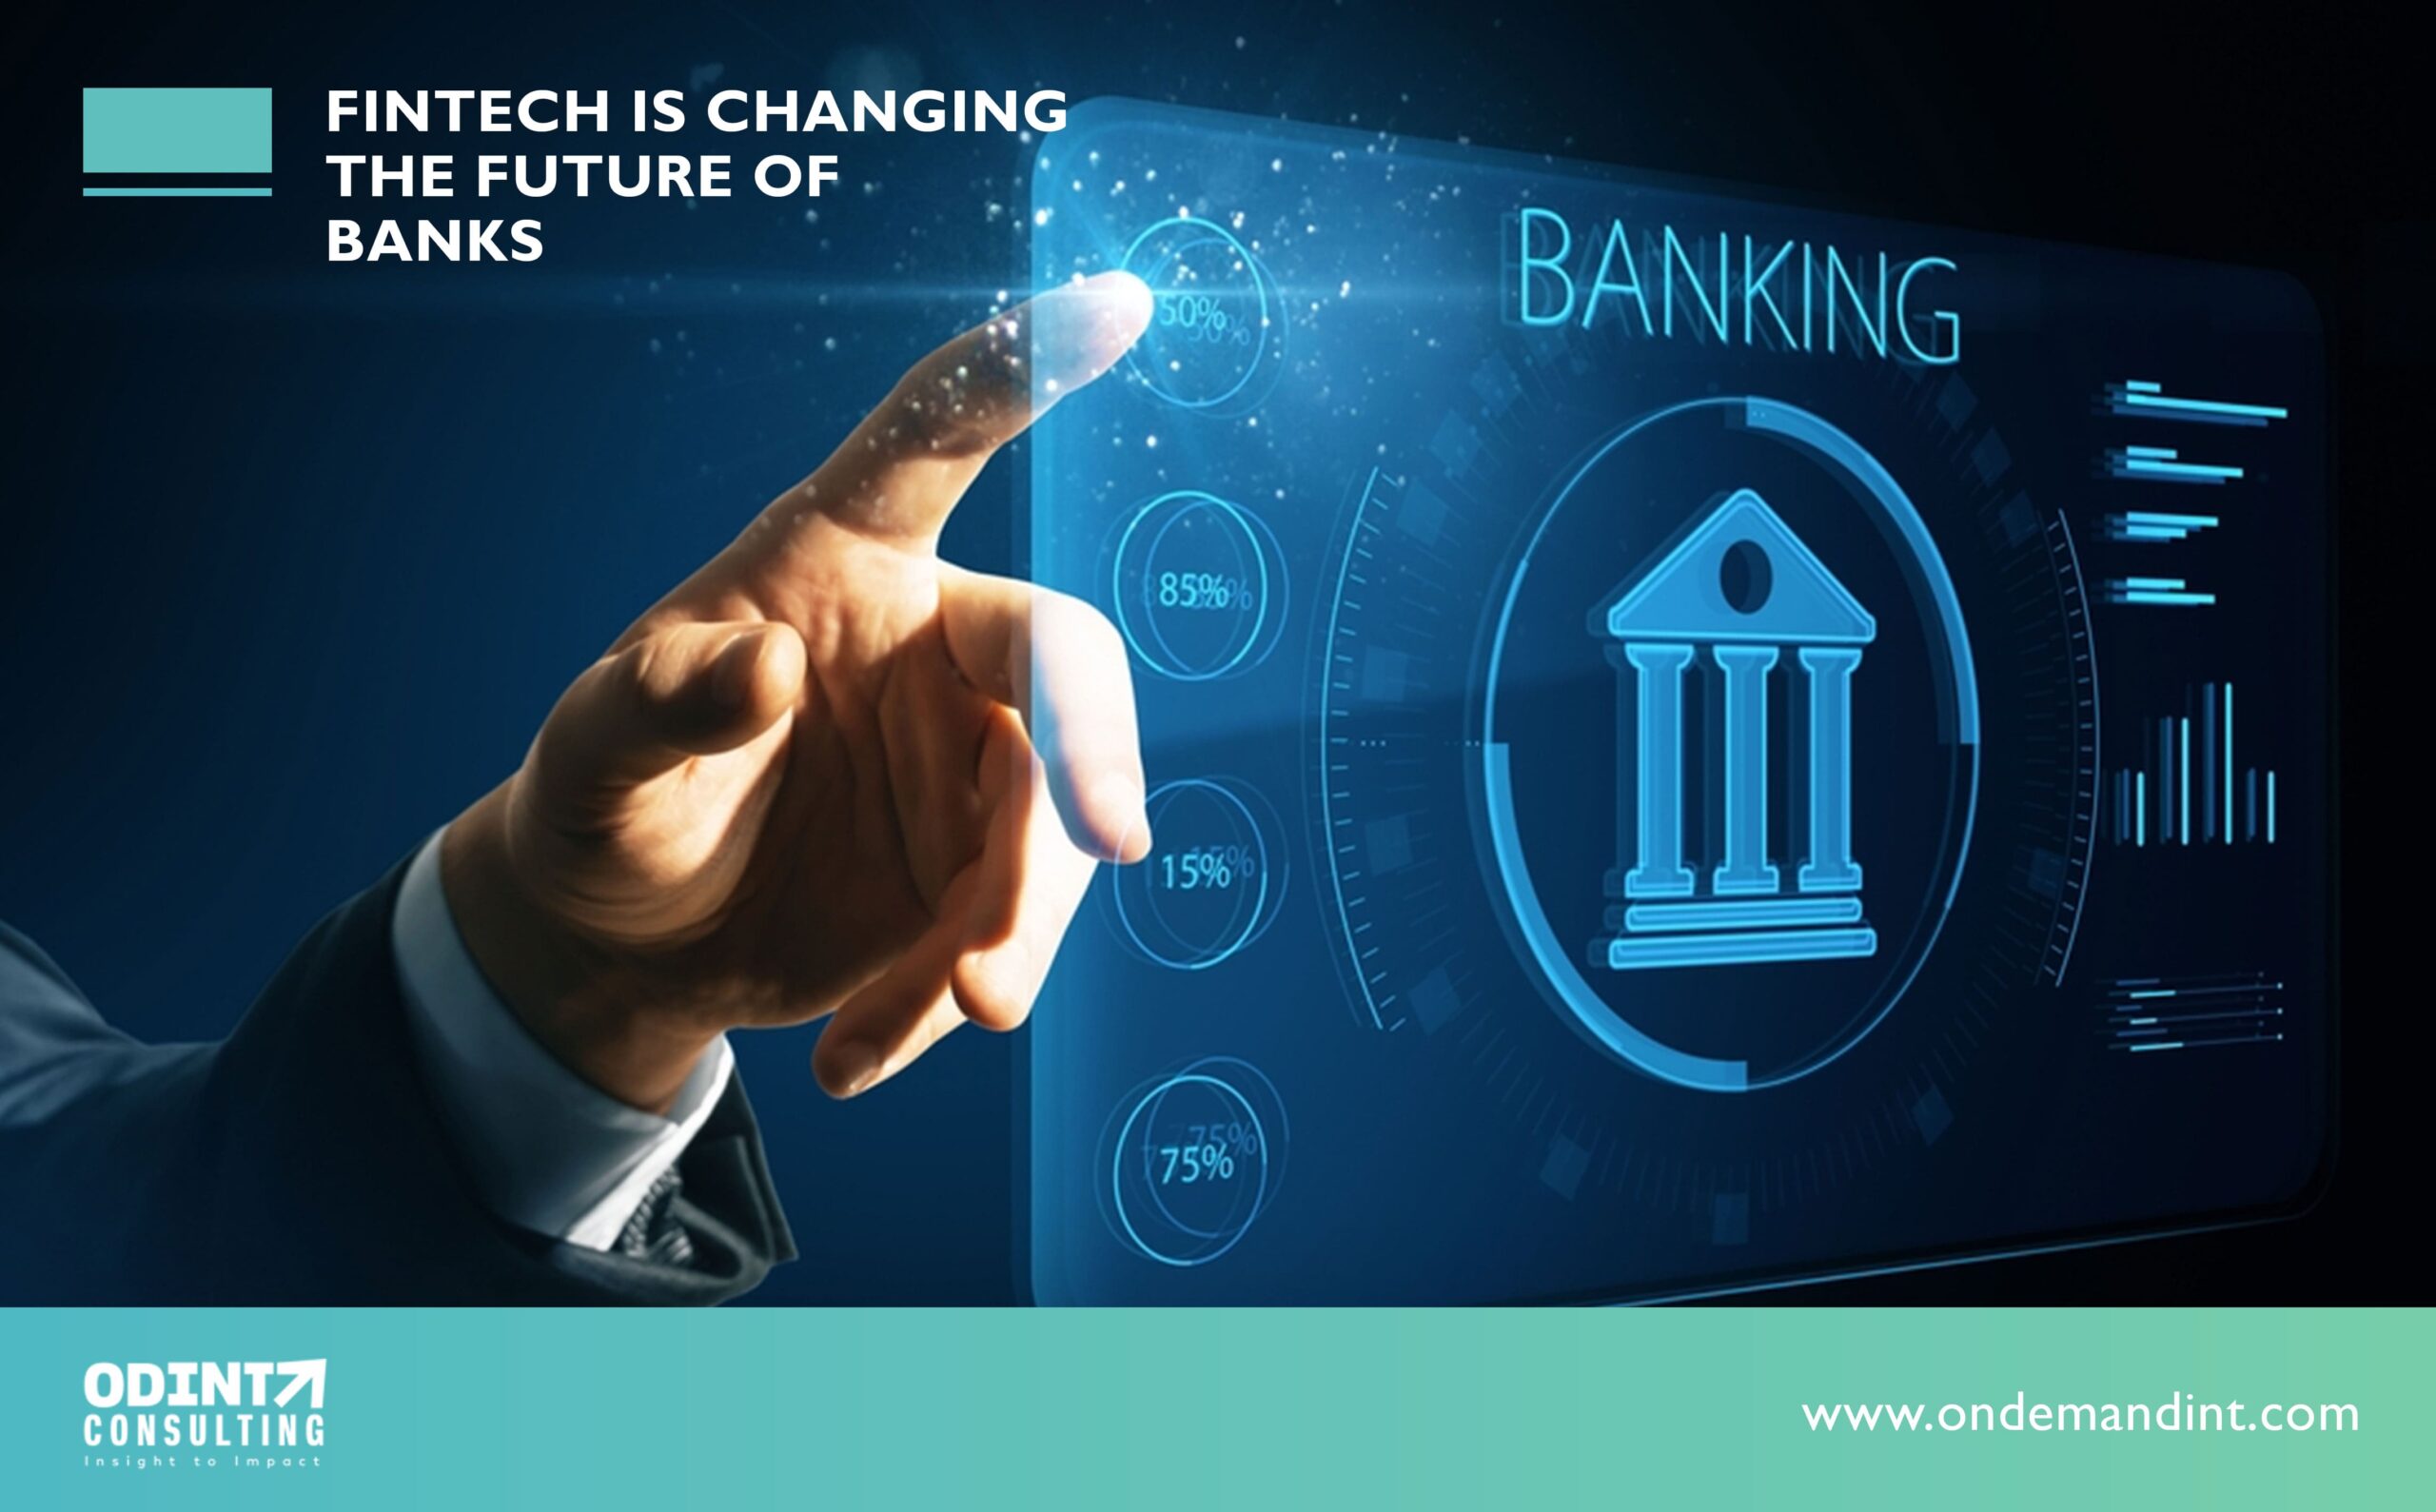 Fintech is changing the future of Banks in 5 ways: Effects & Methods